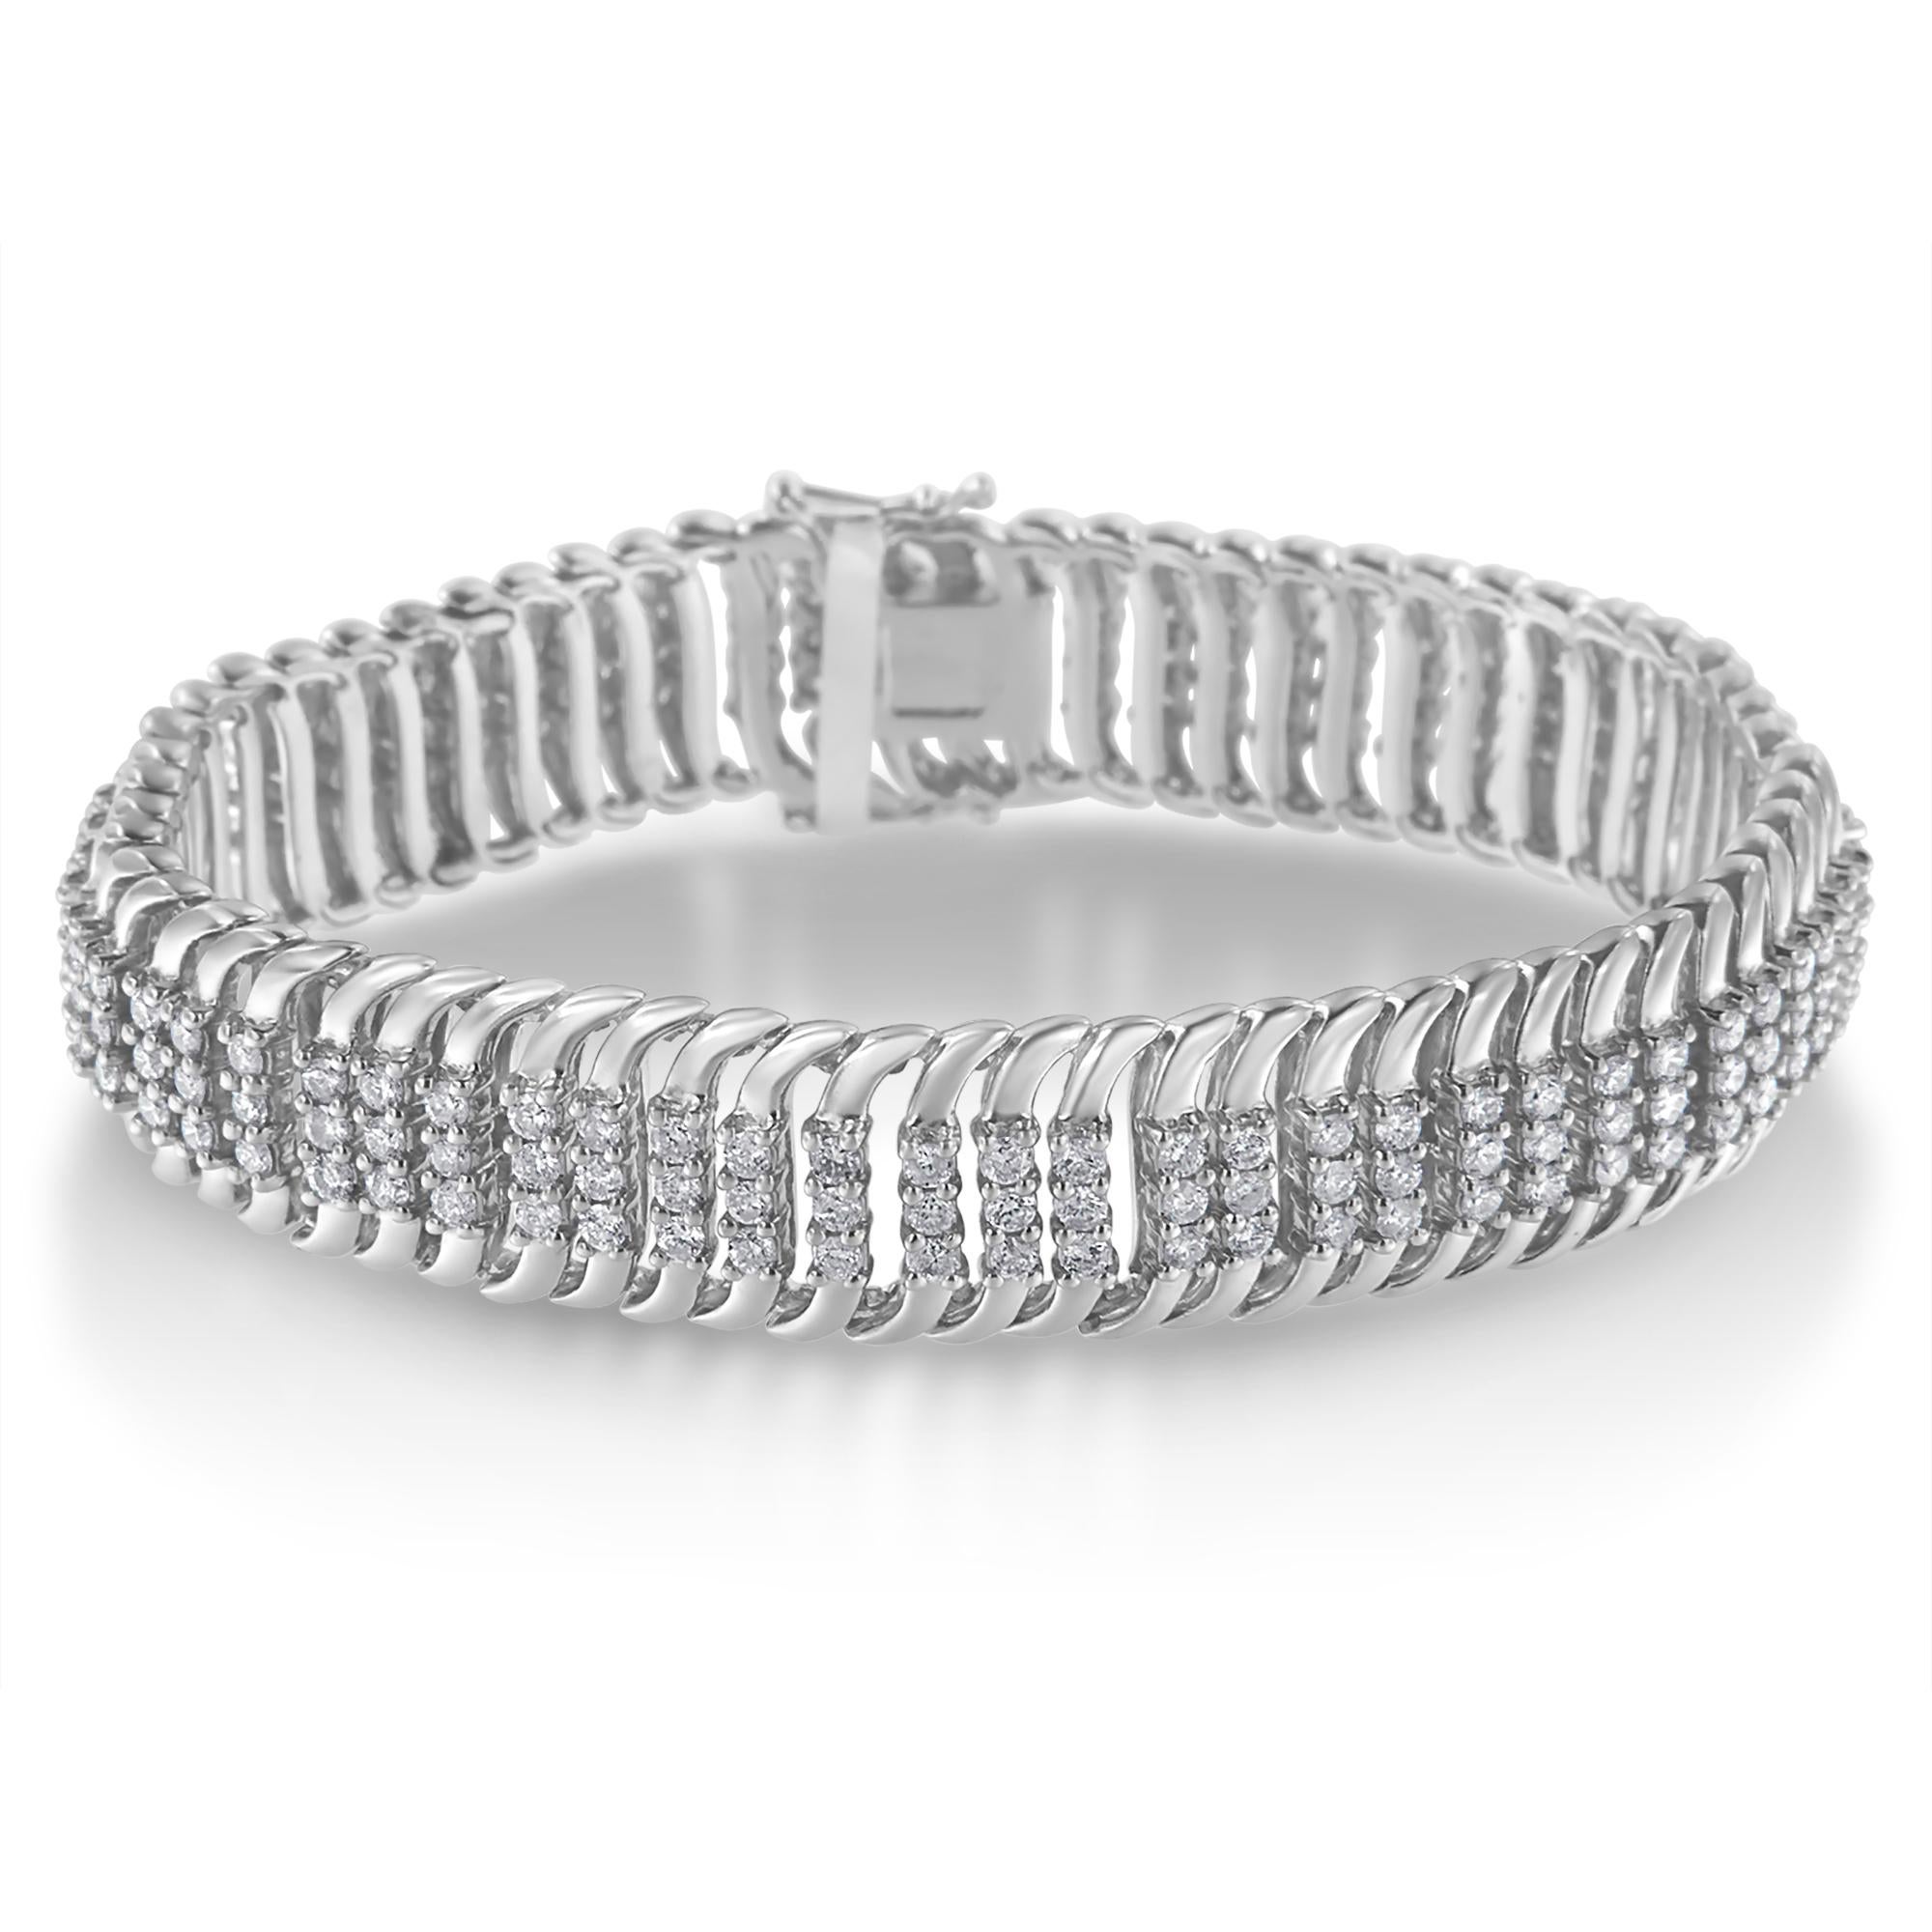 This enchanting diamond bracelet is crafted in 14k white gold and showcases 5 carats TDW of dazzling round cut diamonds. Soft 